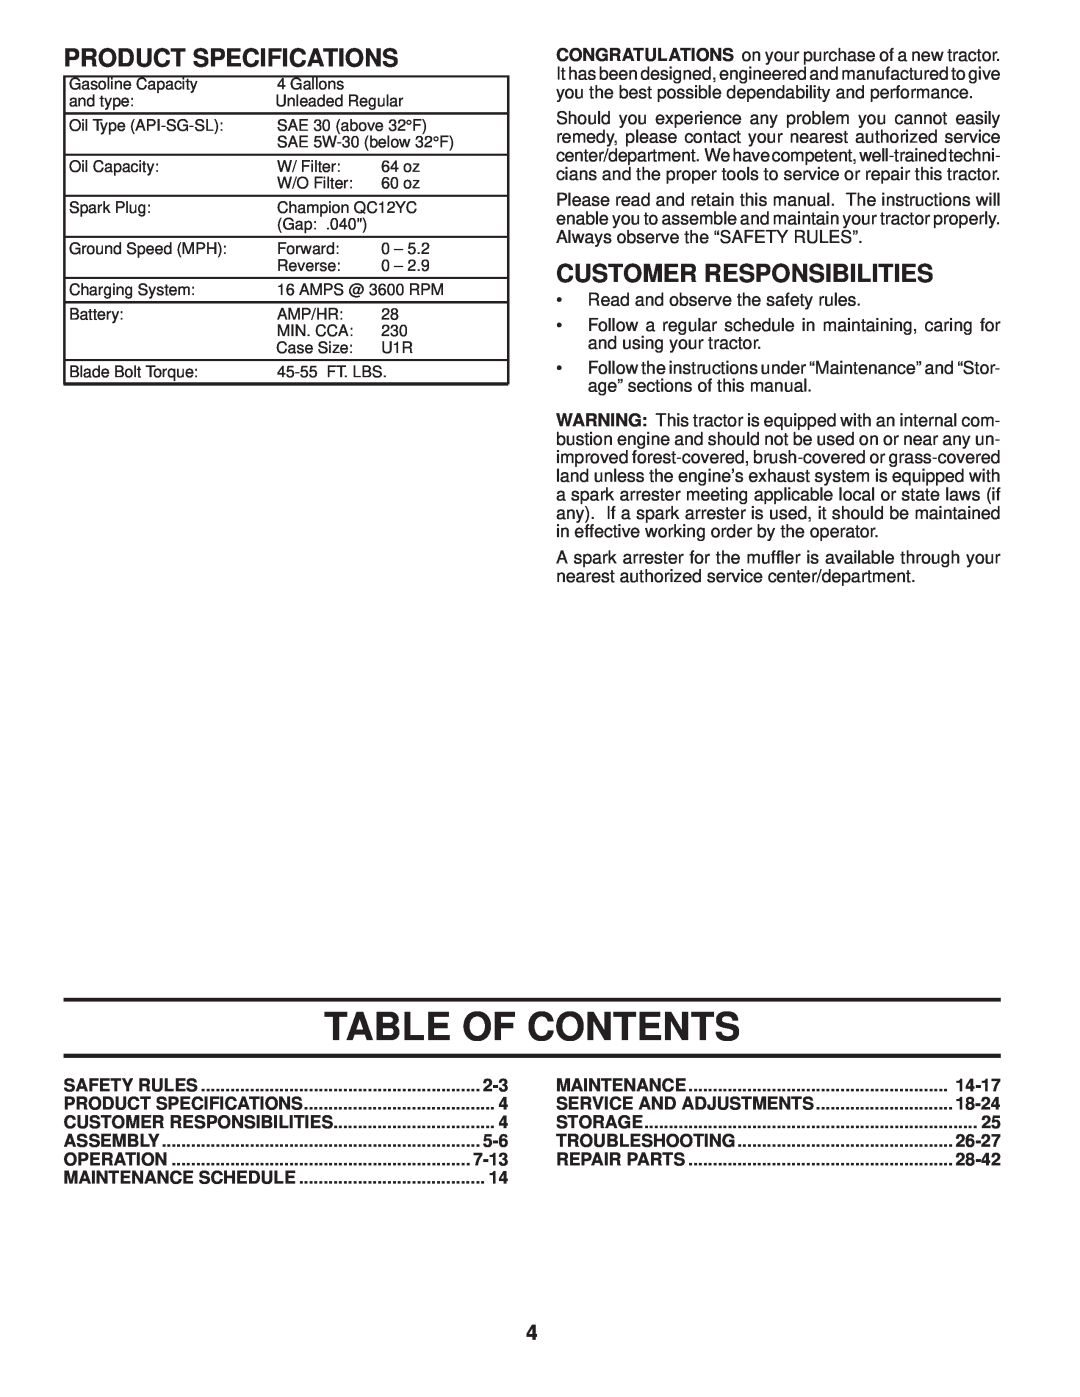 Husqvarna YTH2648 TF Table Of Contents, Product Specifications, Customer Responsibilities, 7-13, 14-17, 18-24, 26-27 